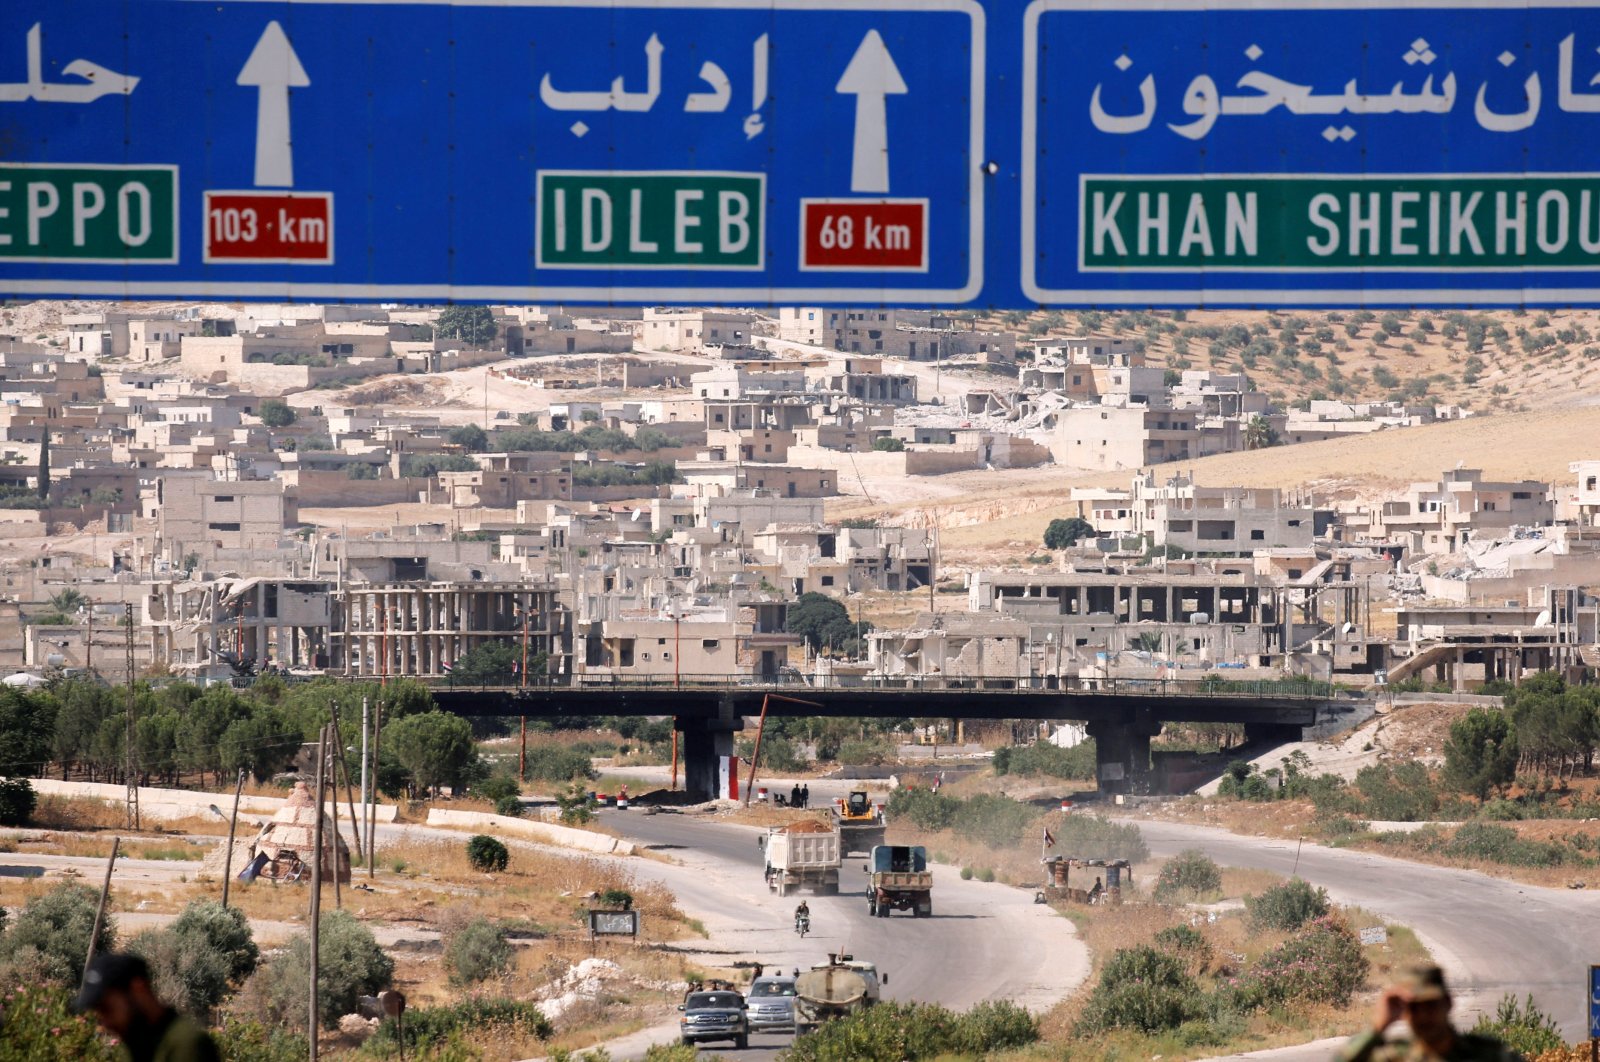 Road direction signs are pictured at the entrance enroute to the town of Khan Sheikhoun, Syria, Aug. 24, 2019. (REUTERS Photo)